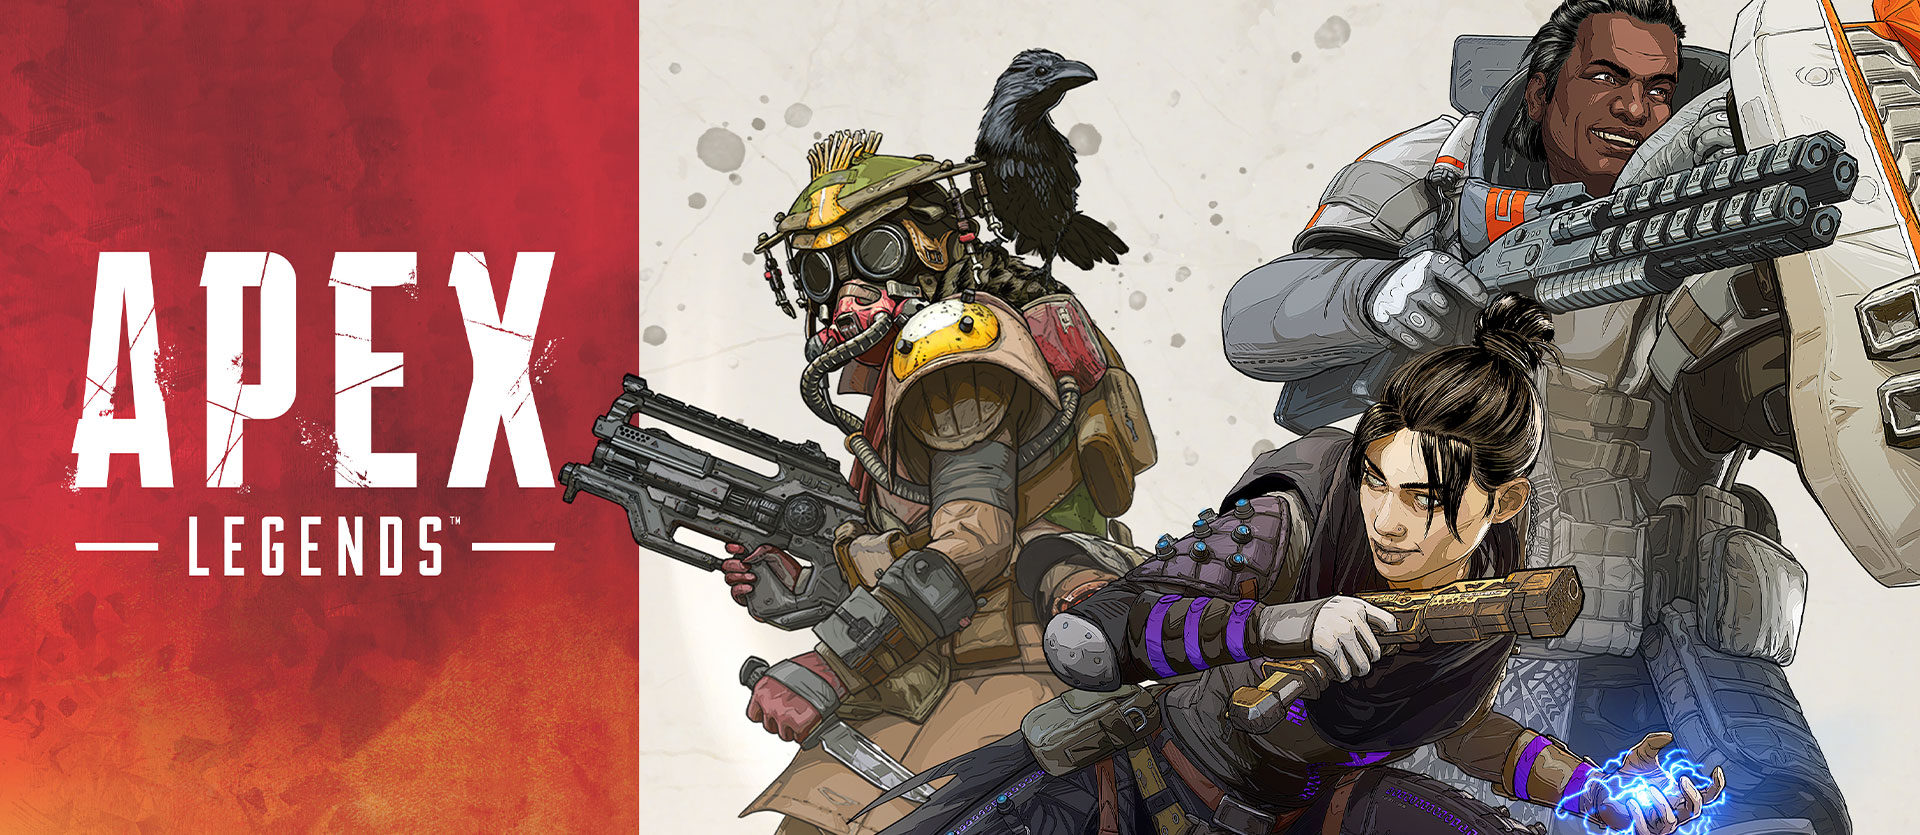 Respawn Is Teasing A New Character For Apex Legends, Or At Least One Of The Developers Is Tweeting About It